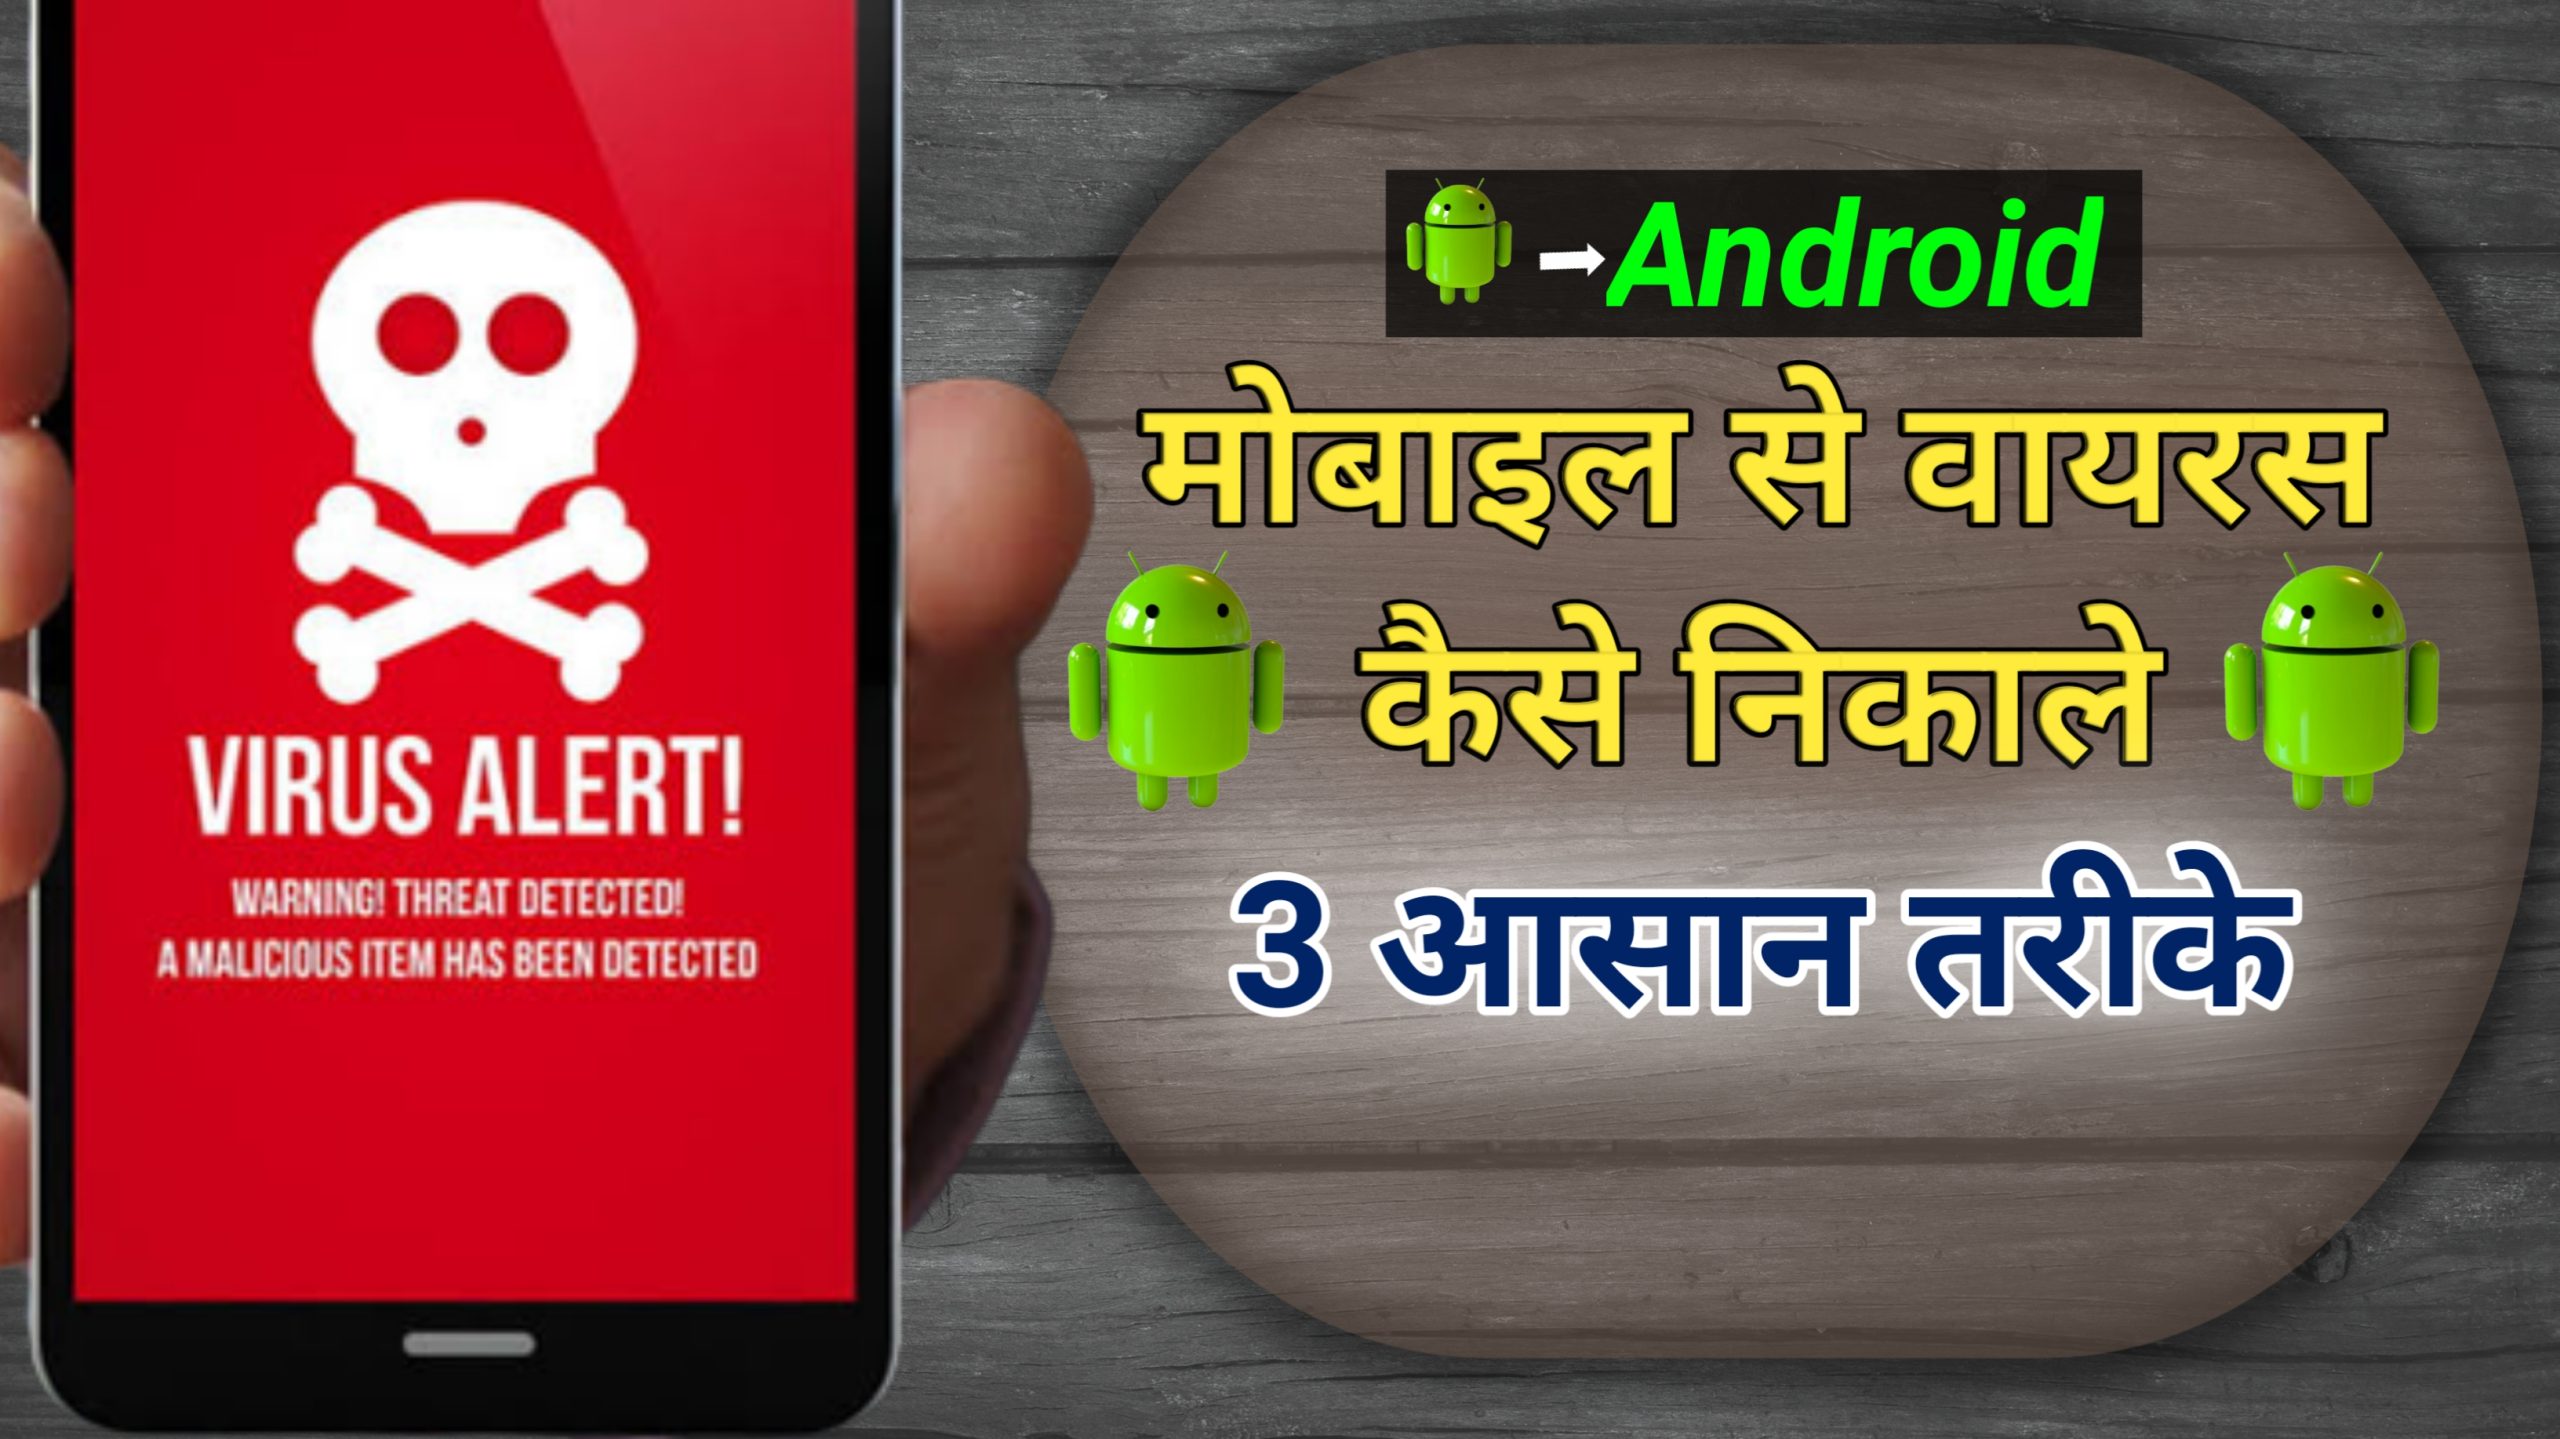 How to Remove Virus from Android Phone Manually